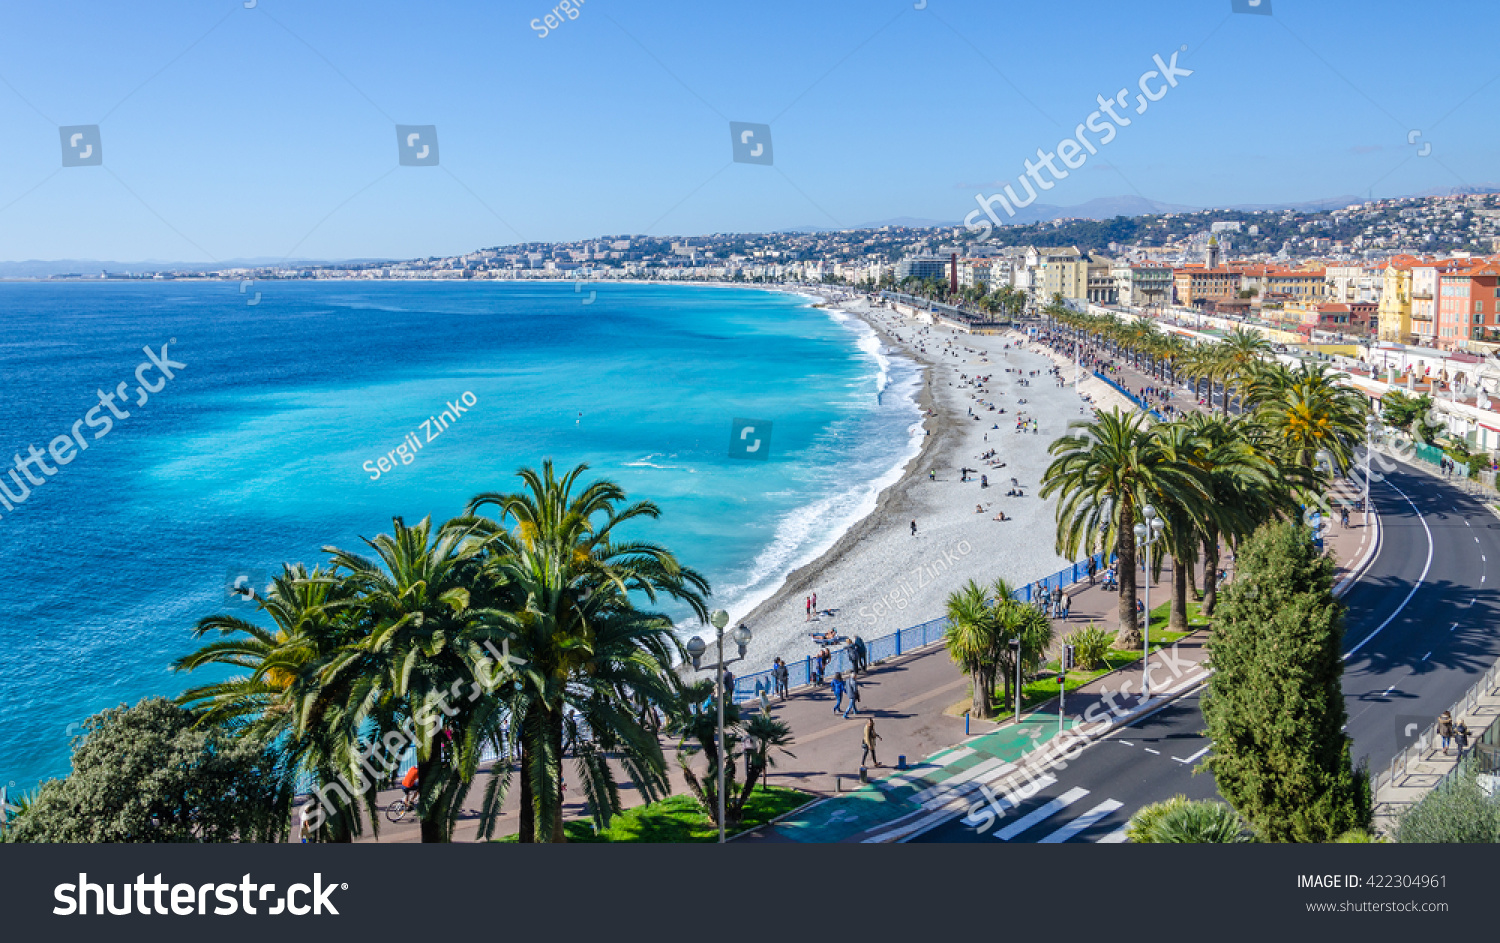 Front view of the Mediterranean sea, bay of Angels, Nice, France #422304961